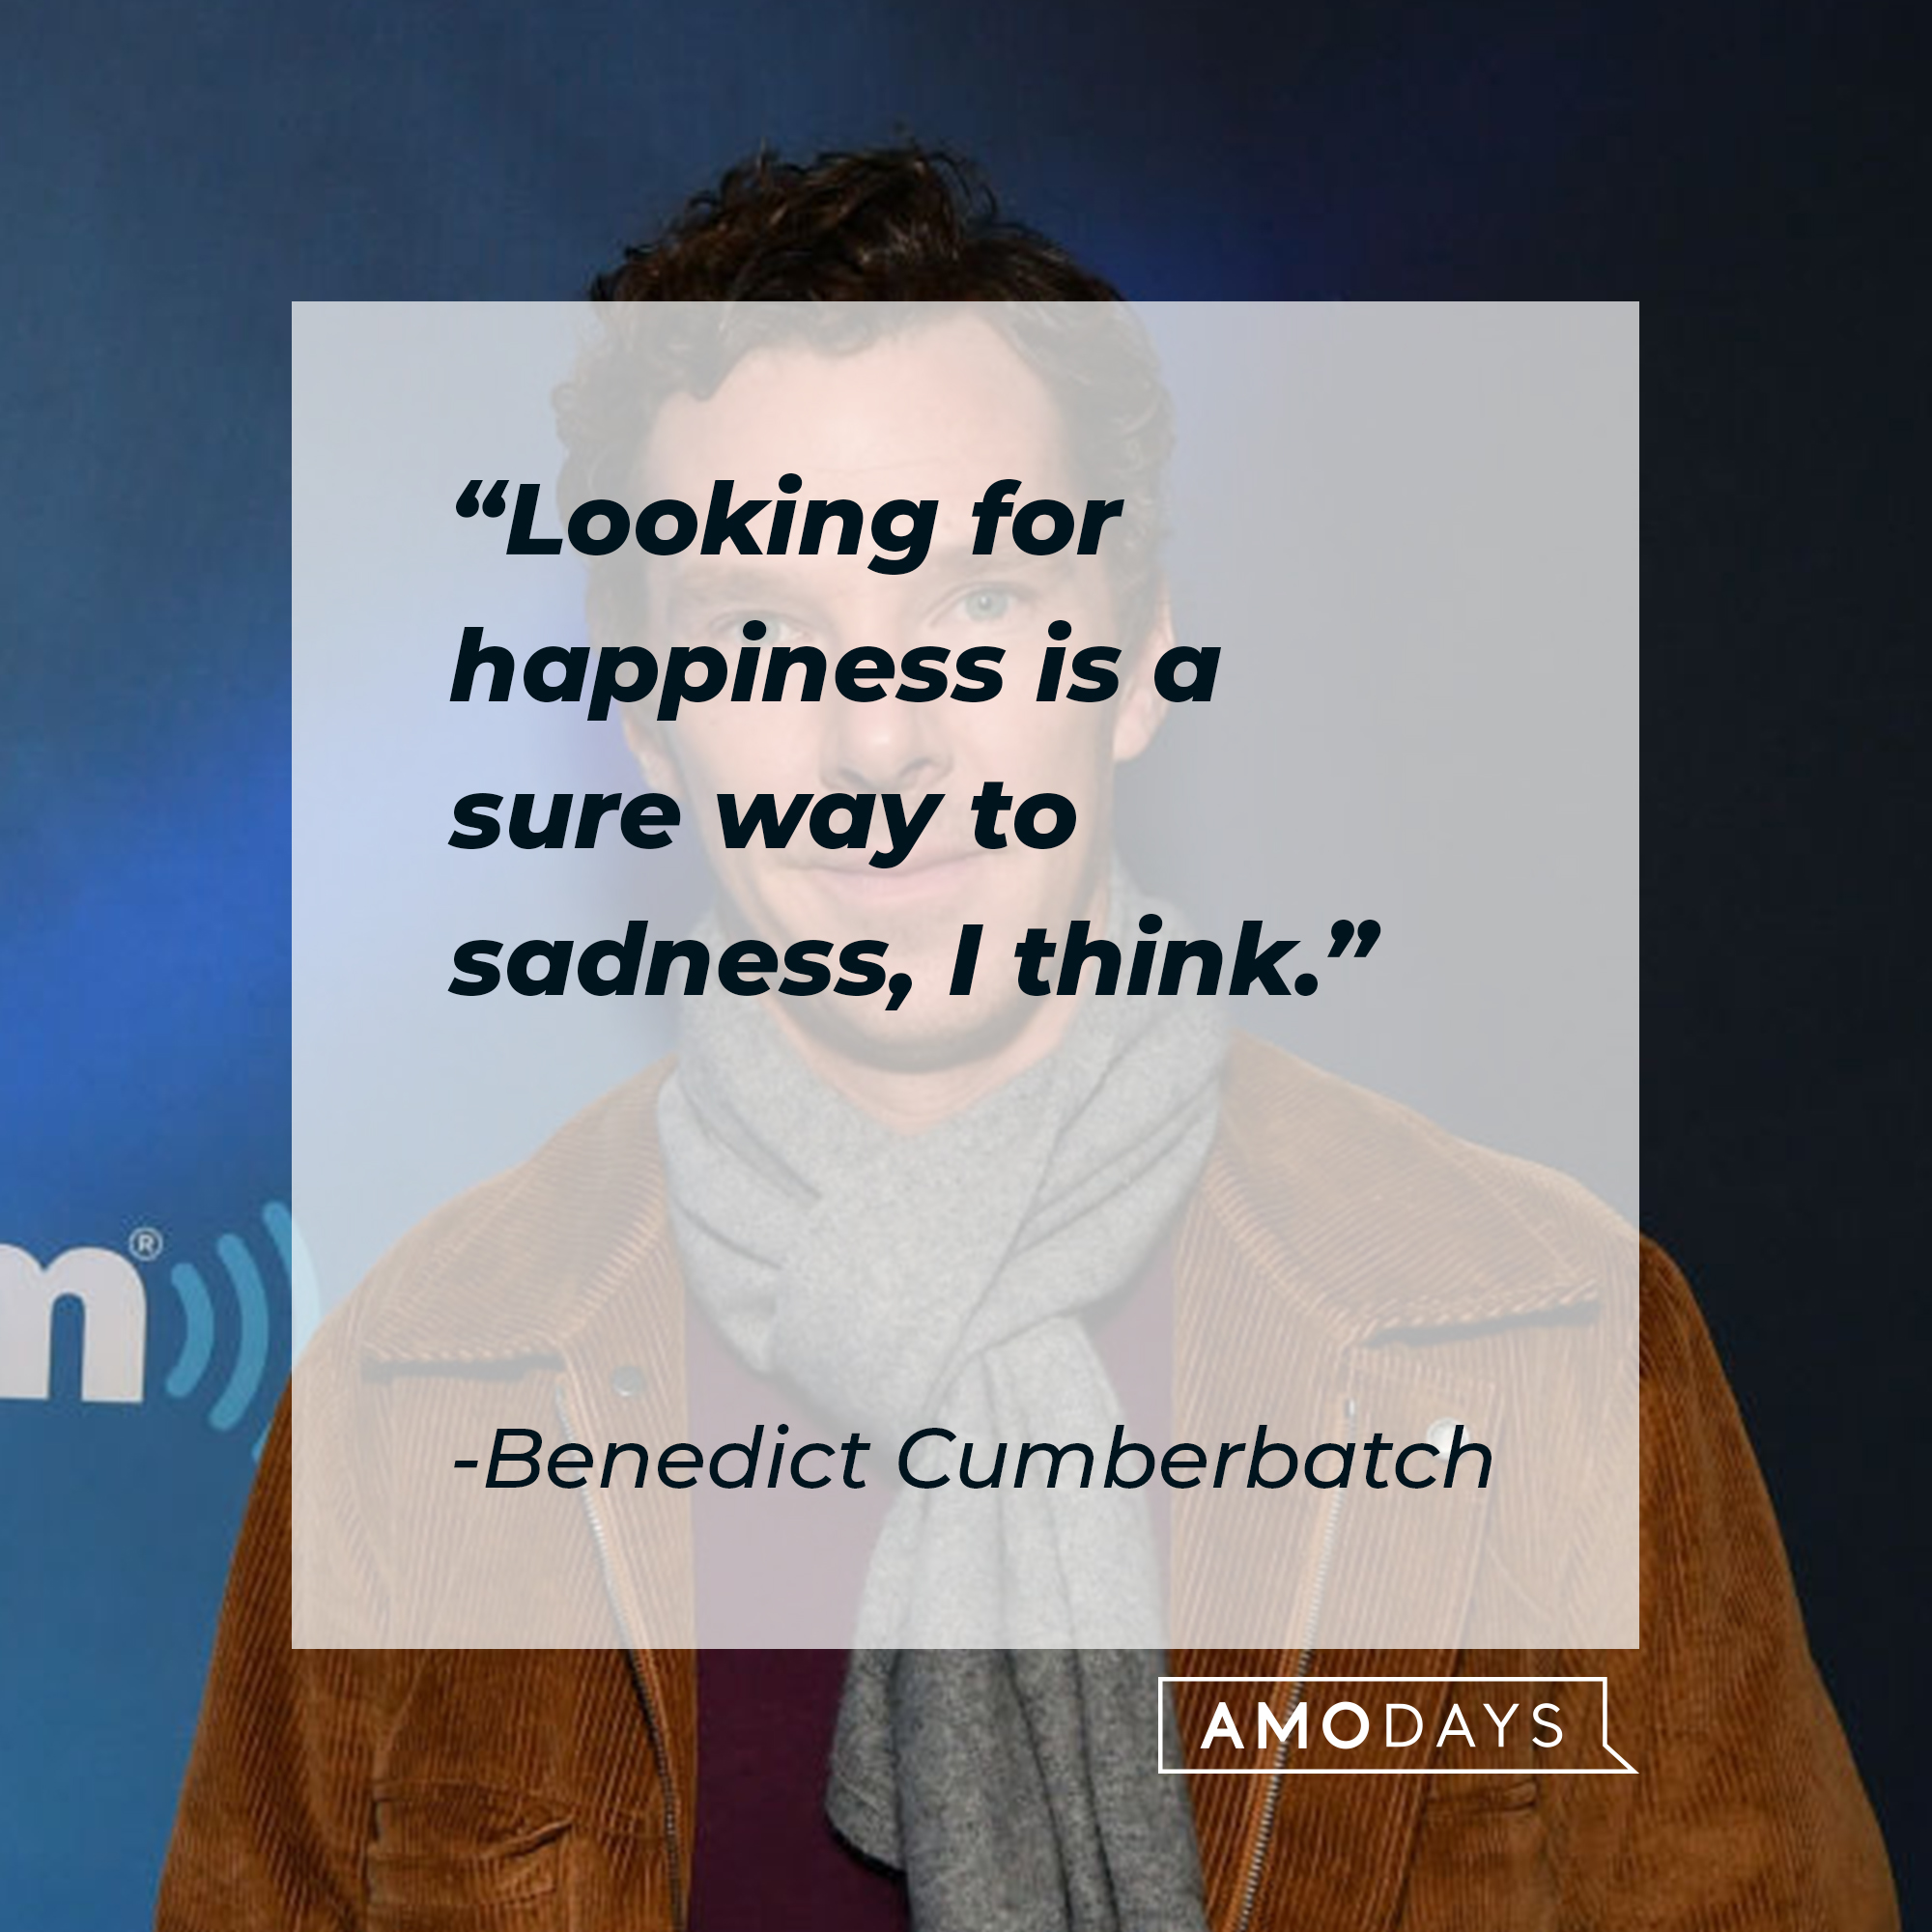 Benedict Cumberbatch, with his quote: “Looking for happiness is a sure way to sadness, I think.”| Source: Getty Images